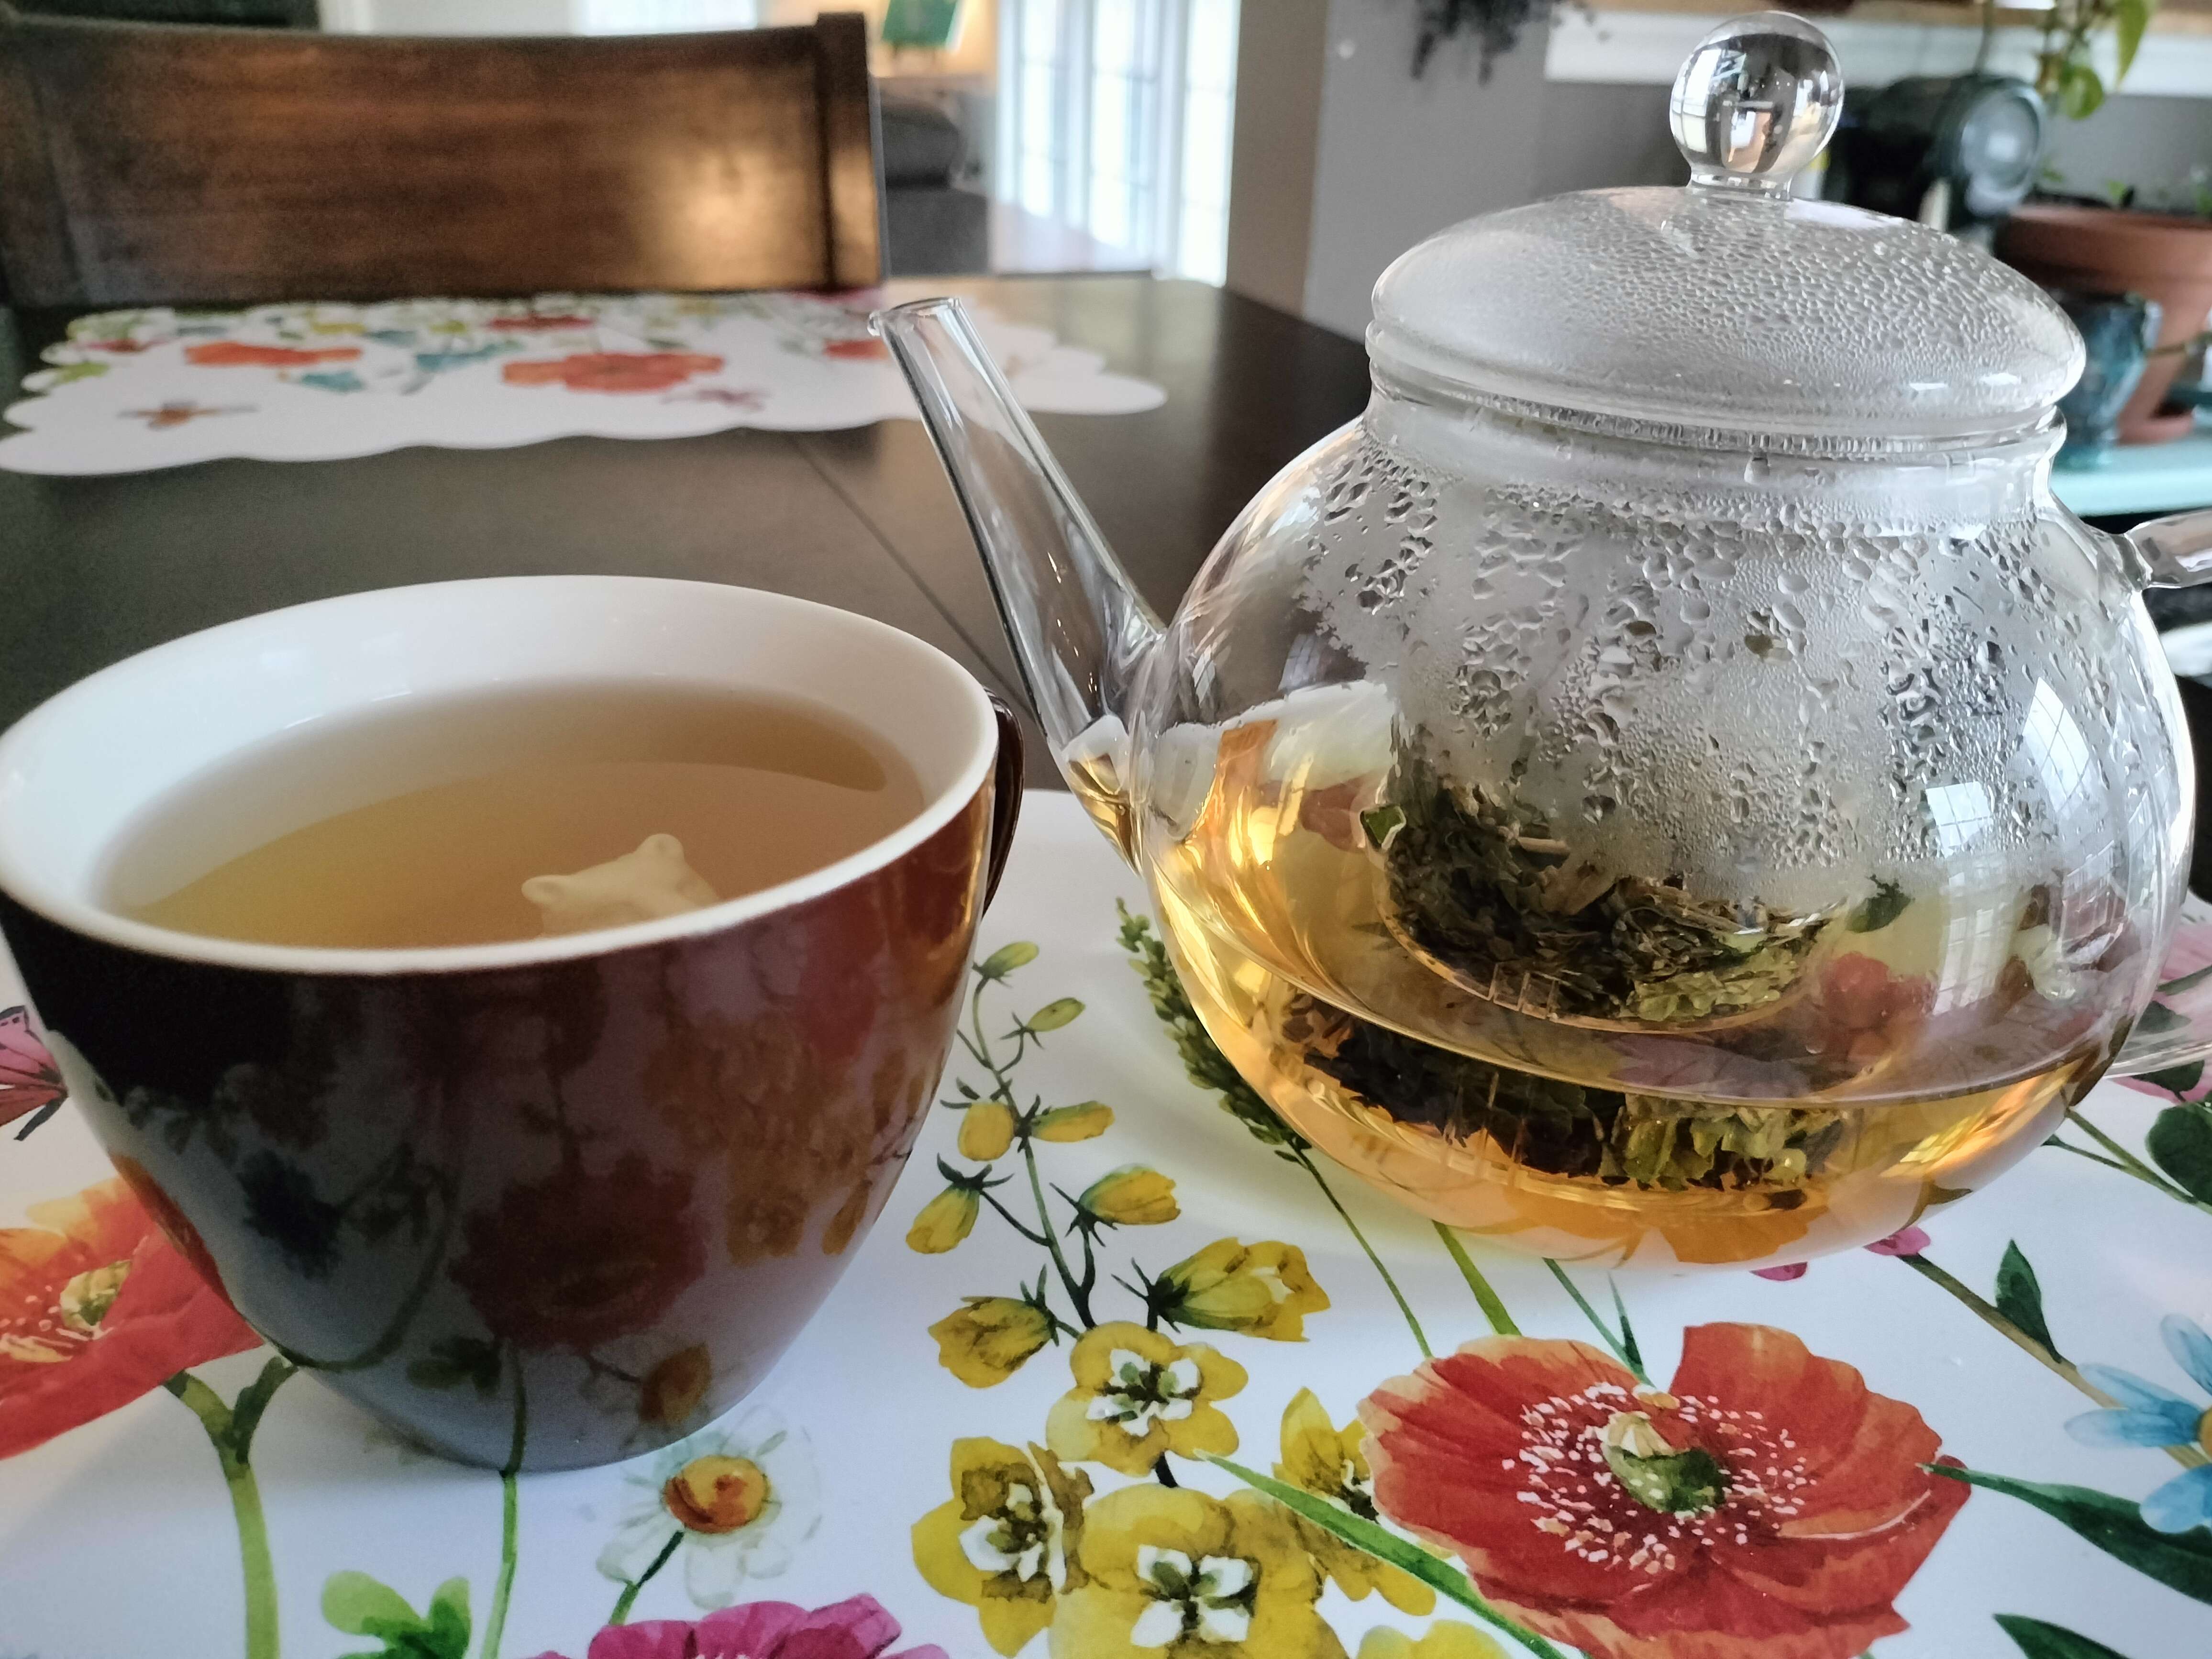 A full cup of tea, next to a mostly-empty glass teapot. Steam obscures the inside of the teapot, but you can see tea leaves held in an infuser inside it. In the cup, you can just barely see the head of a bear figure peeking out.